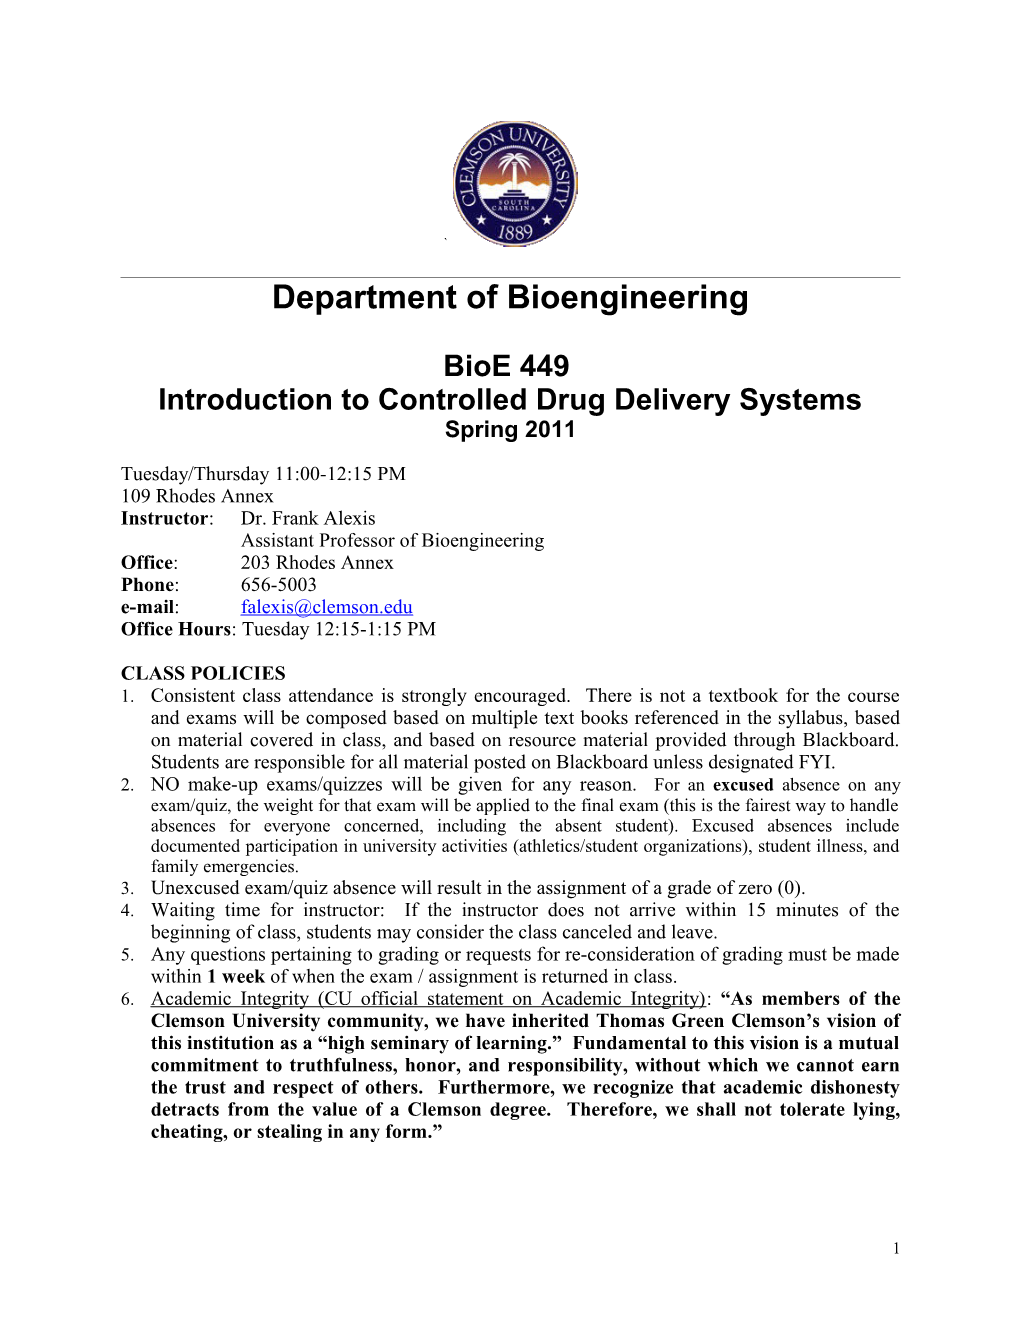 Introduction to Controlled Drug Delivery Systems